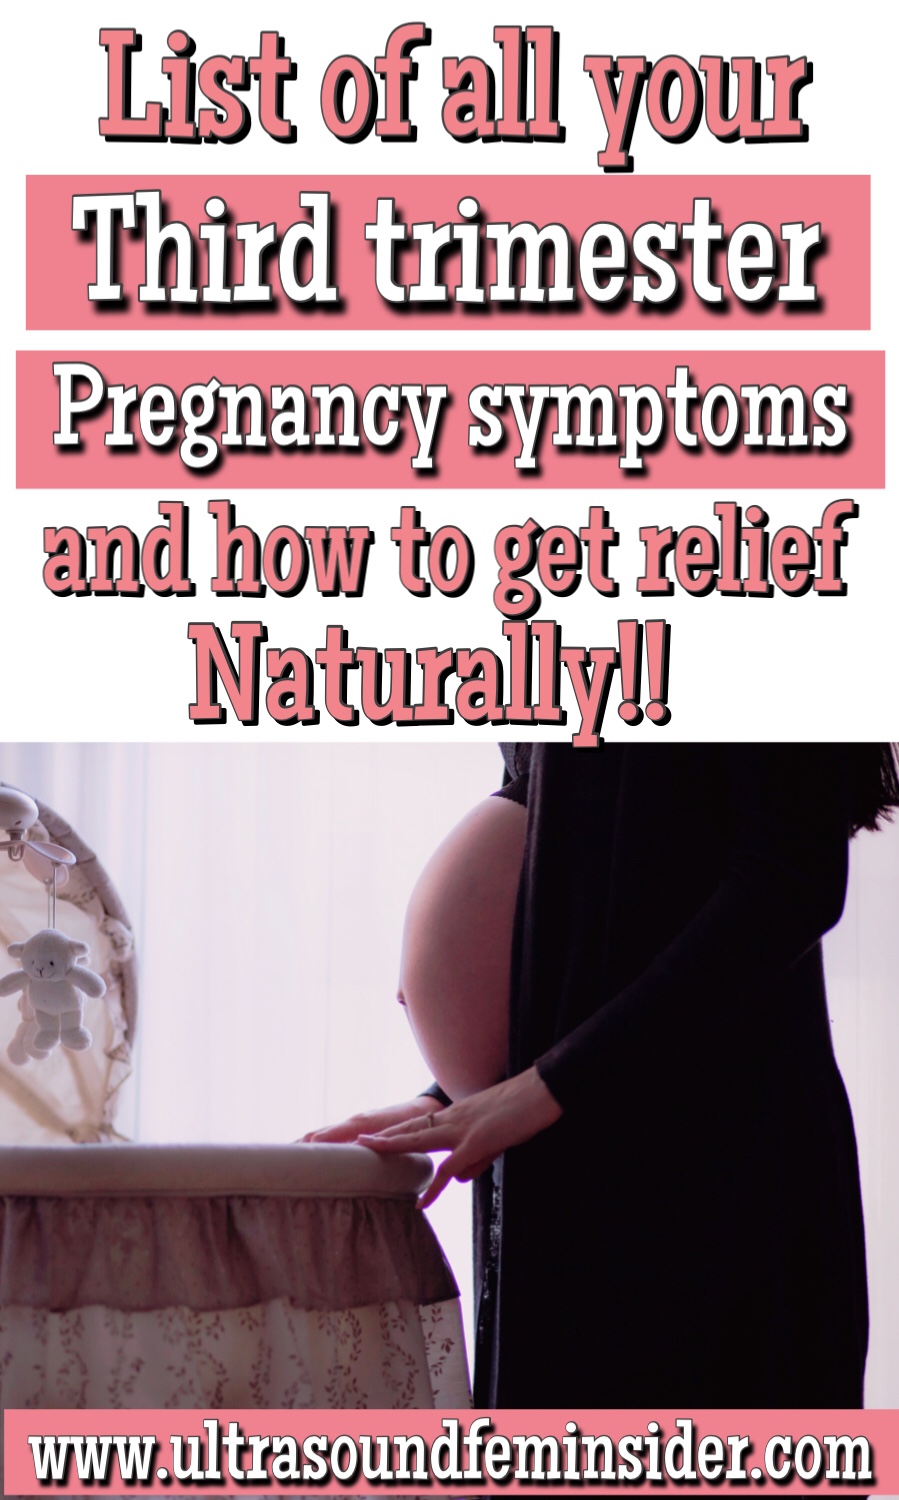 Pregnancy symptoms for the third trimester